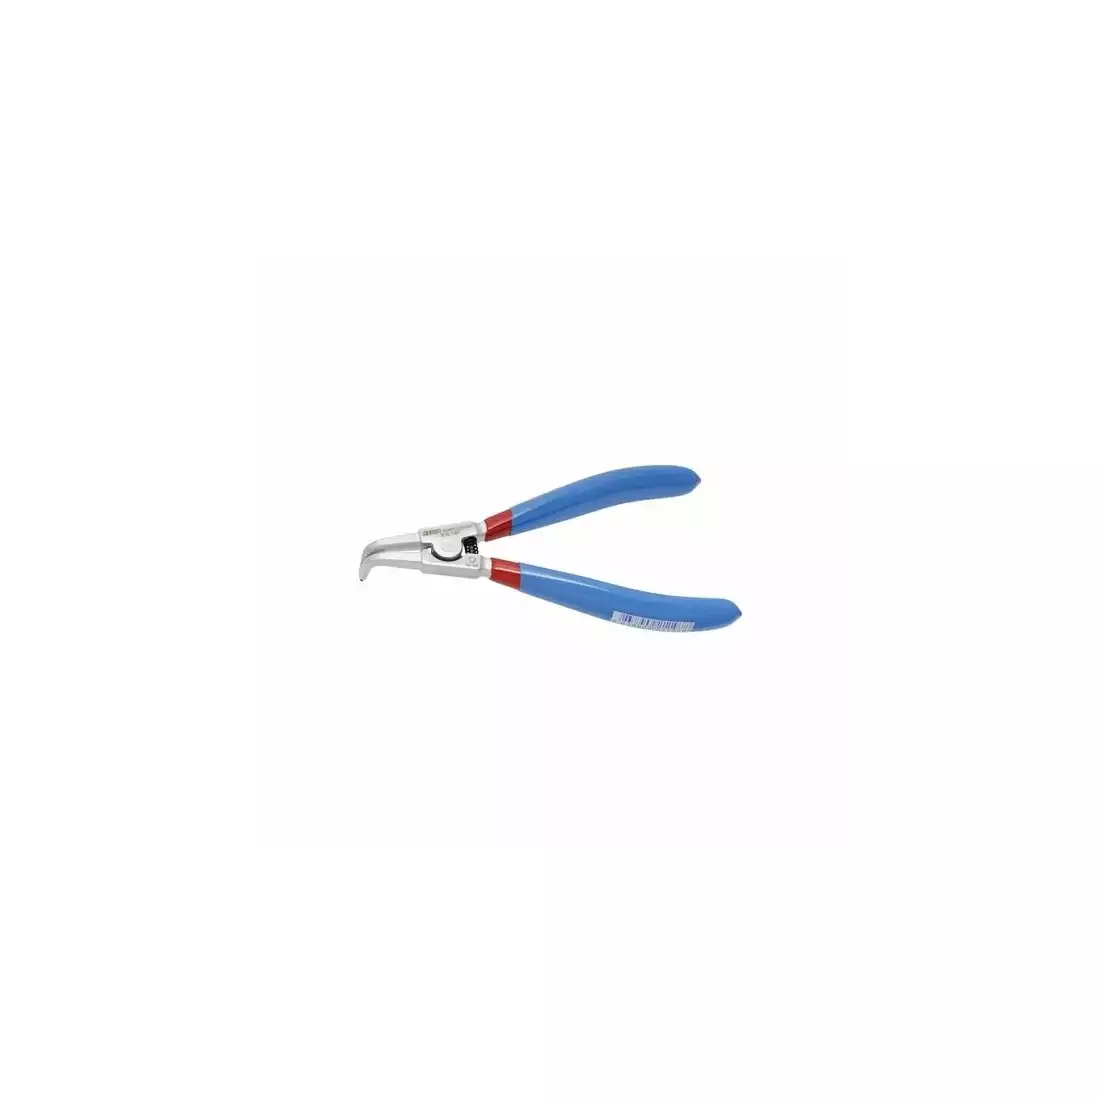 UNIOR angle pliers for circlips 19-60 mm